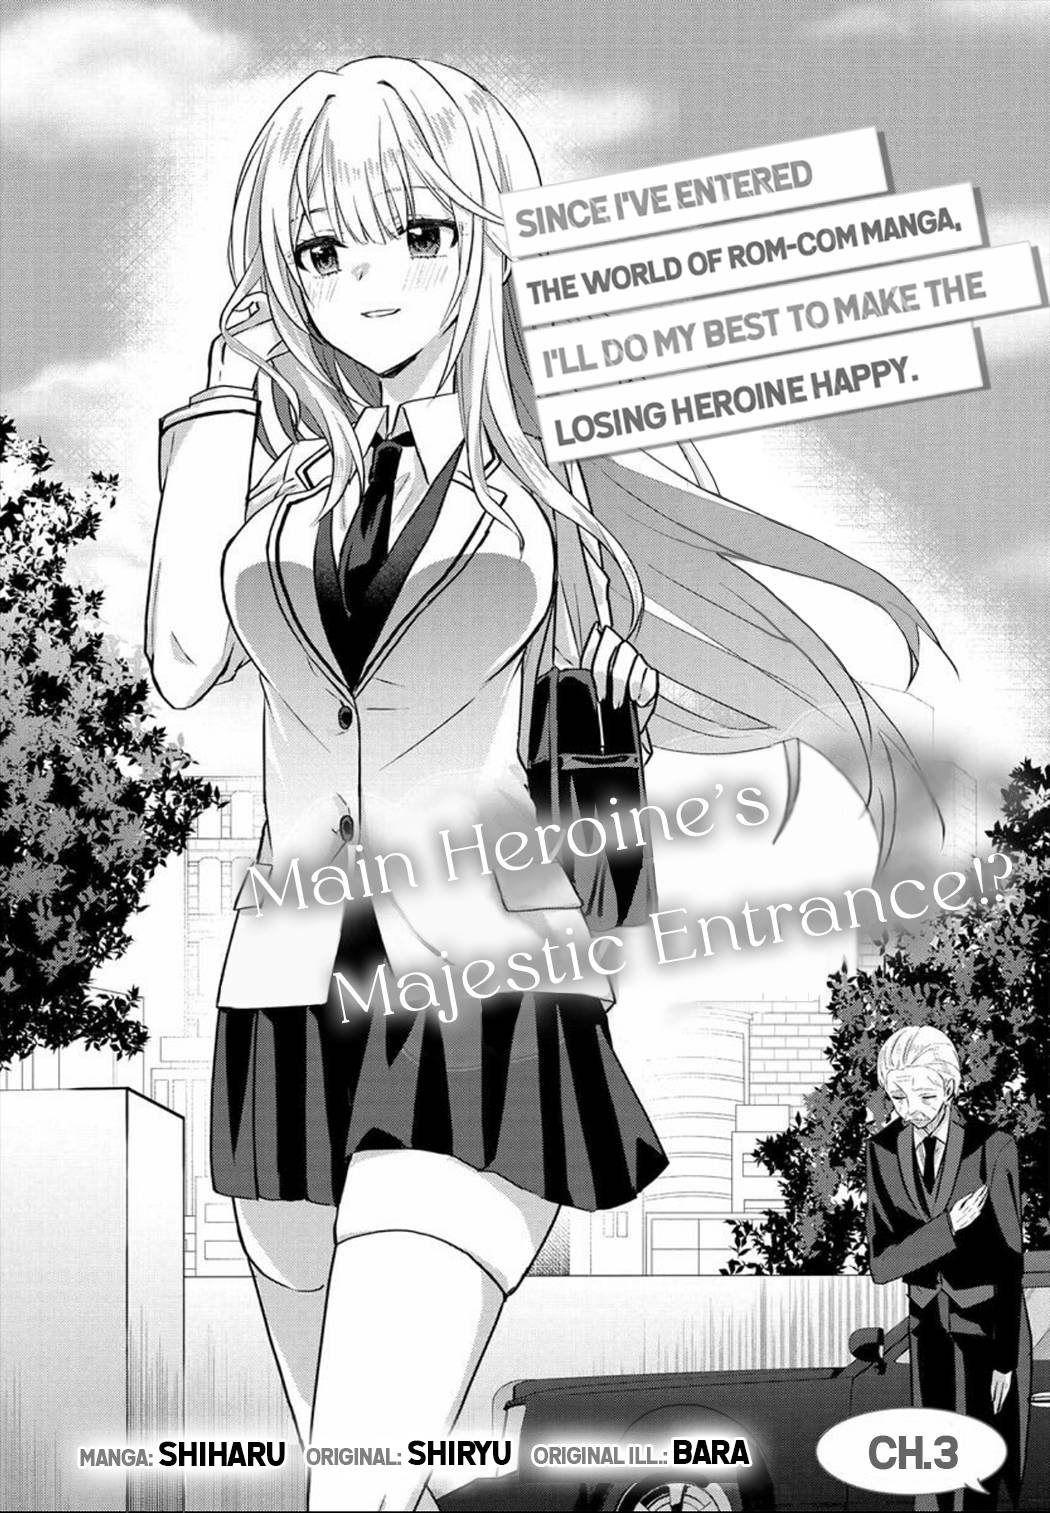 Since I’Ve Entered The World Of Romantic Comedy Manga, I’Ll Do My Best To Make The Losing Heroine Happy - chapter 3.1 - #2